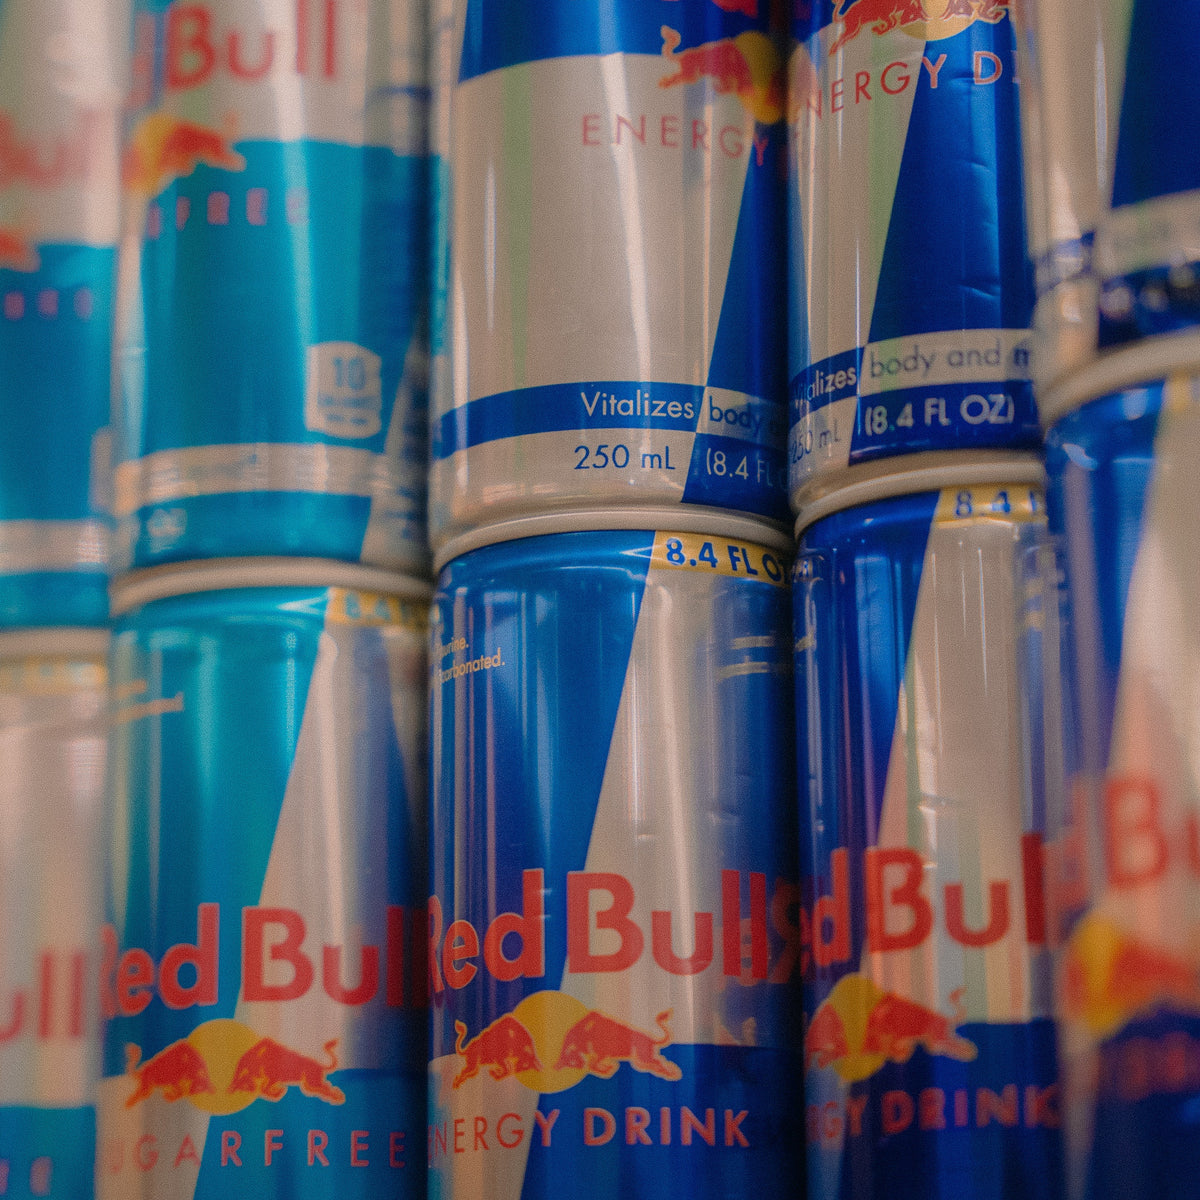 How Caffeine In Red Bull? [A Rad Guide]